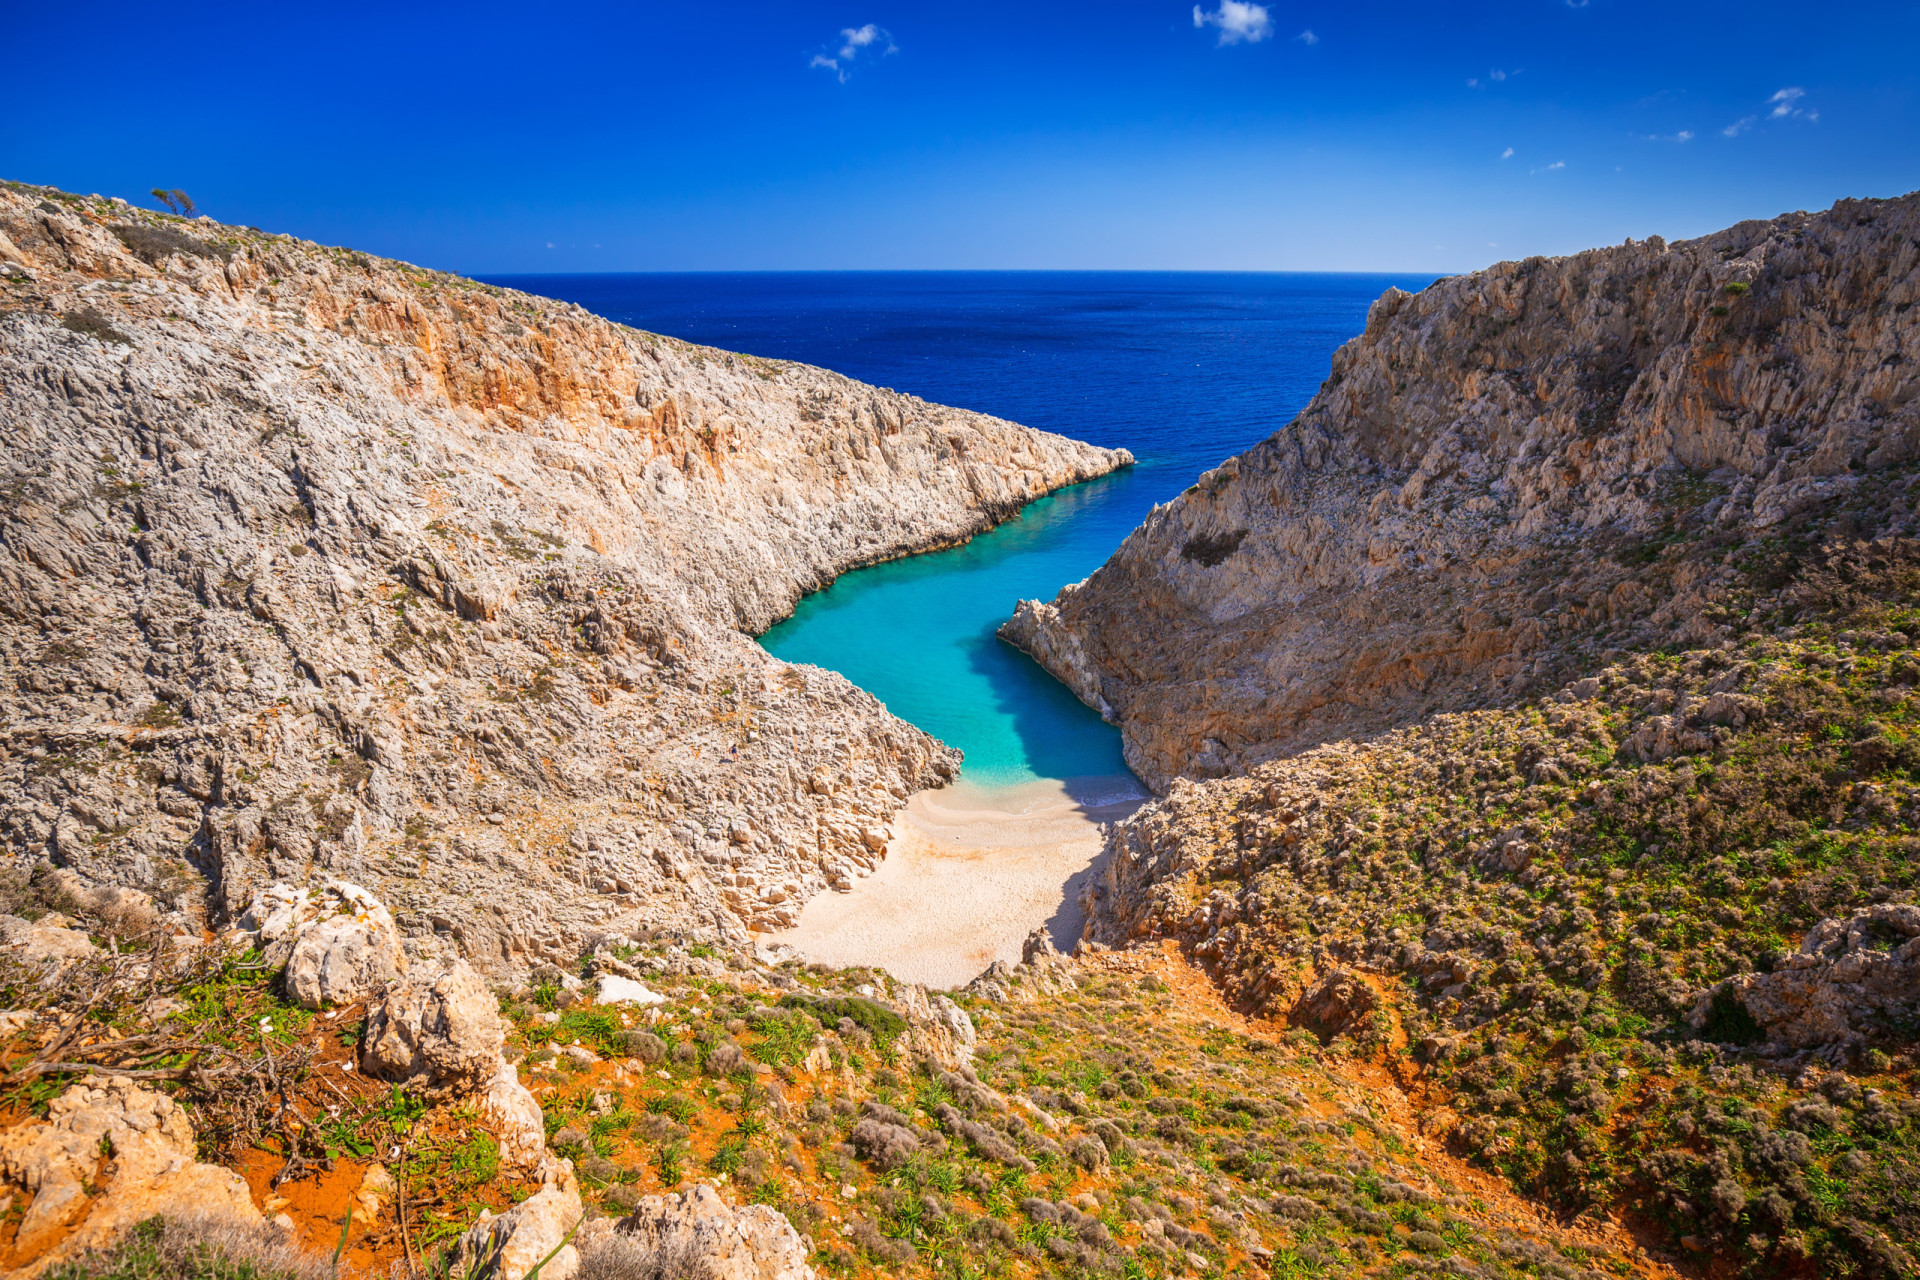 <p>Score: 4.019</p> <p>Located in the northeastern coast of Crete, Seitan Limania is a beautiful, hidden beach. The rocky underwater is perfect for snorkeling!</p><p>You may also like:<a href="https://www.starsinsider.com/n/389724?utm_source=msn.com&utm_medium=display&utm_campaign=referral_description&utm_content=697708en-en_selected"> The dark and creepy origins of classic fairy tales</a></p>